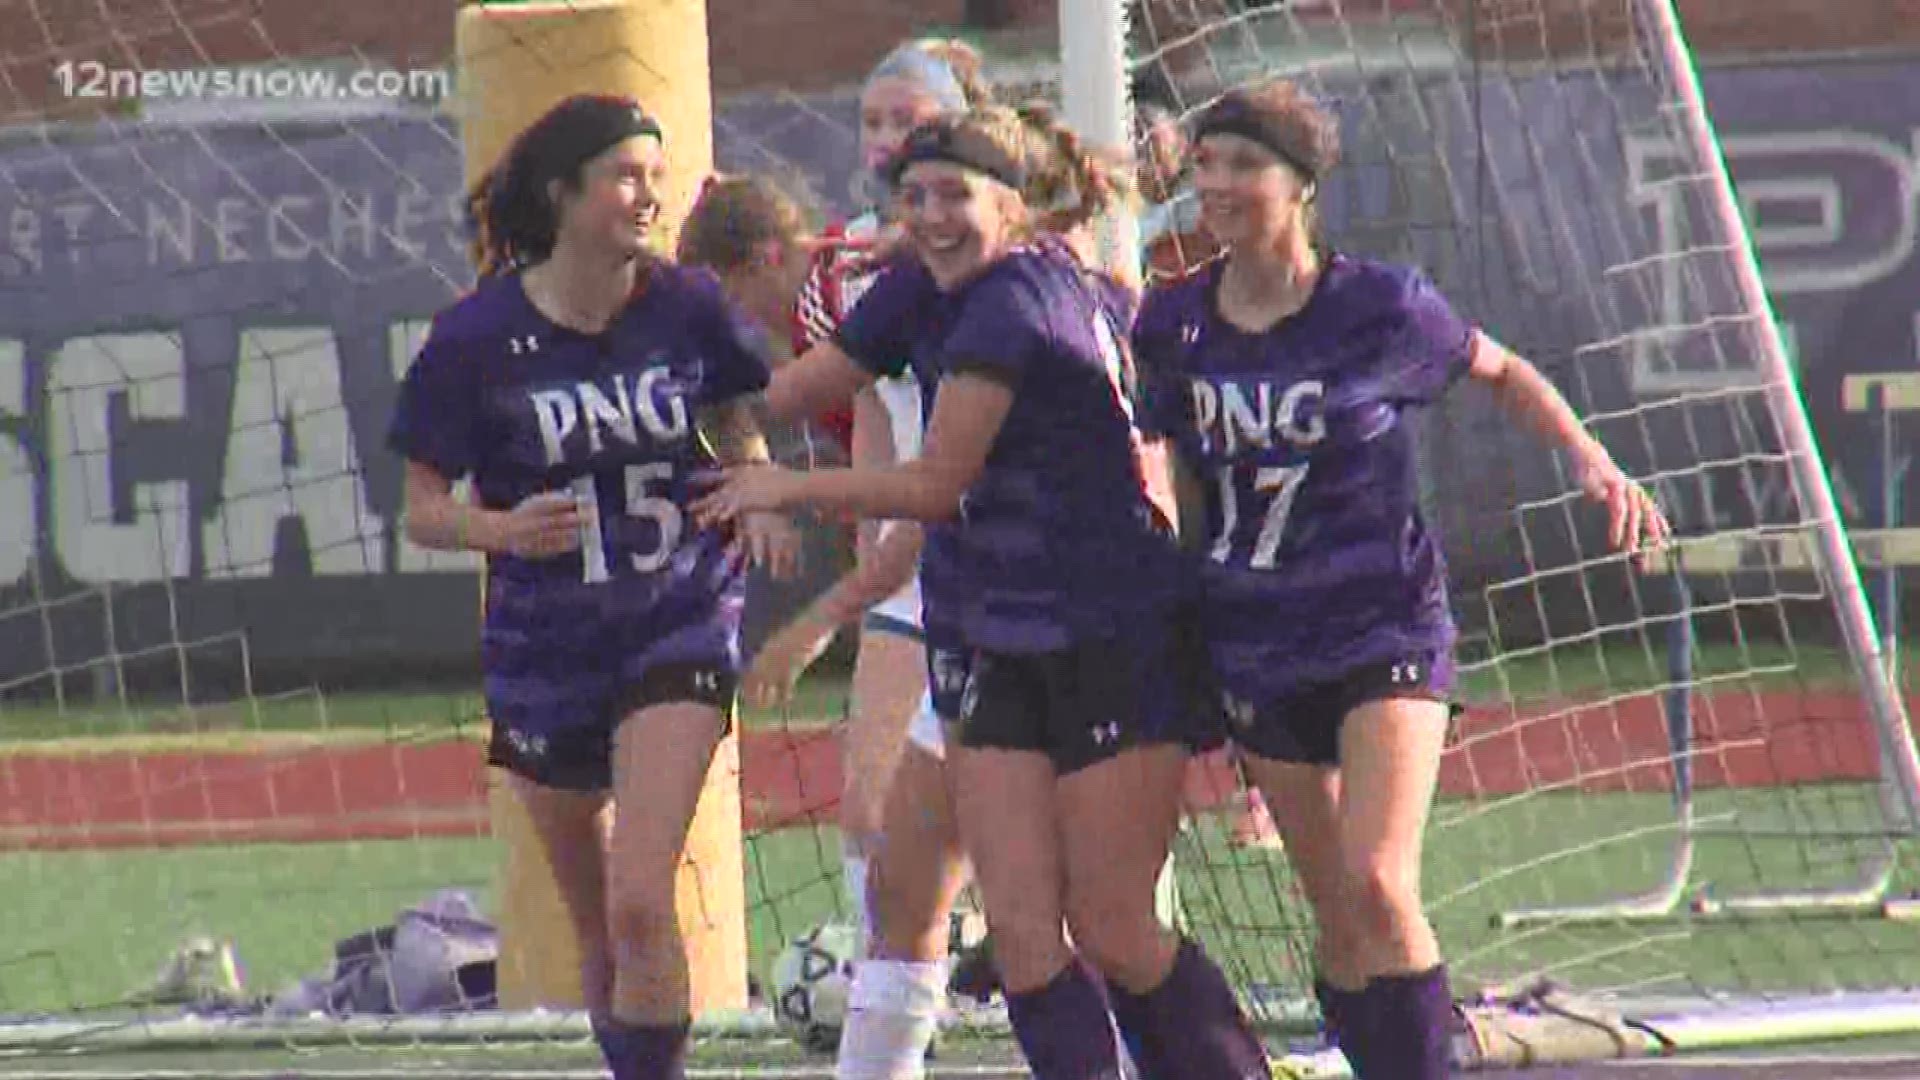 PN-G hosted Kelly on the opening day of the Cajun Classic soccer tournament at the Reservation Thursday.